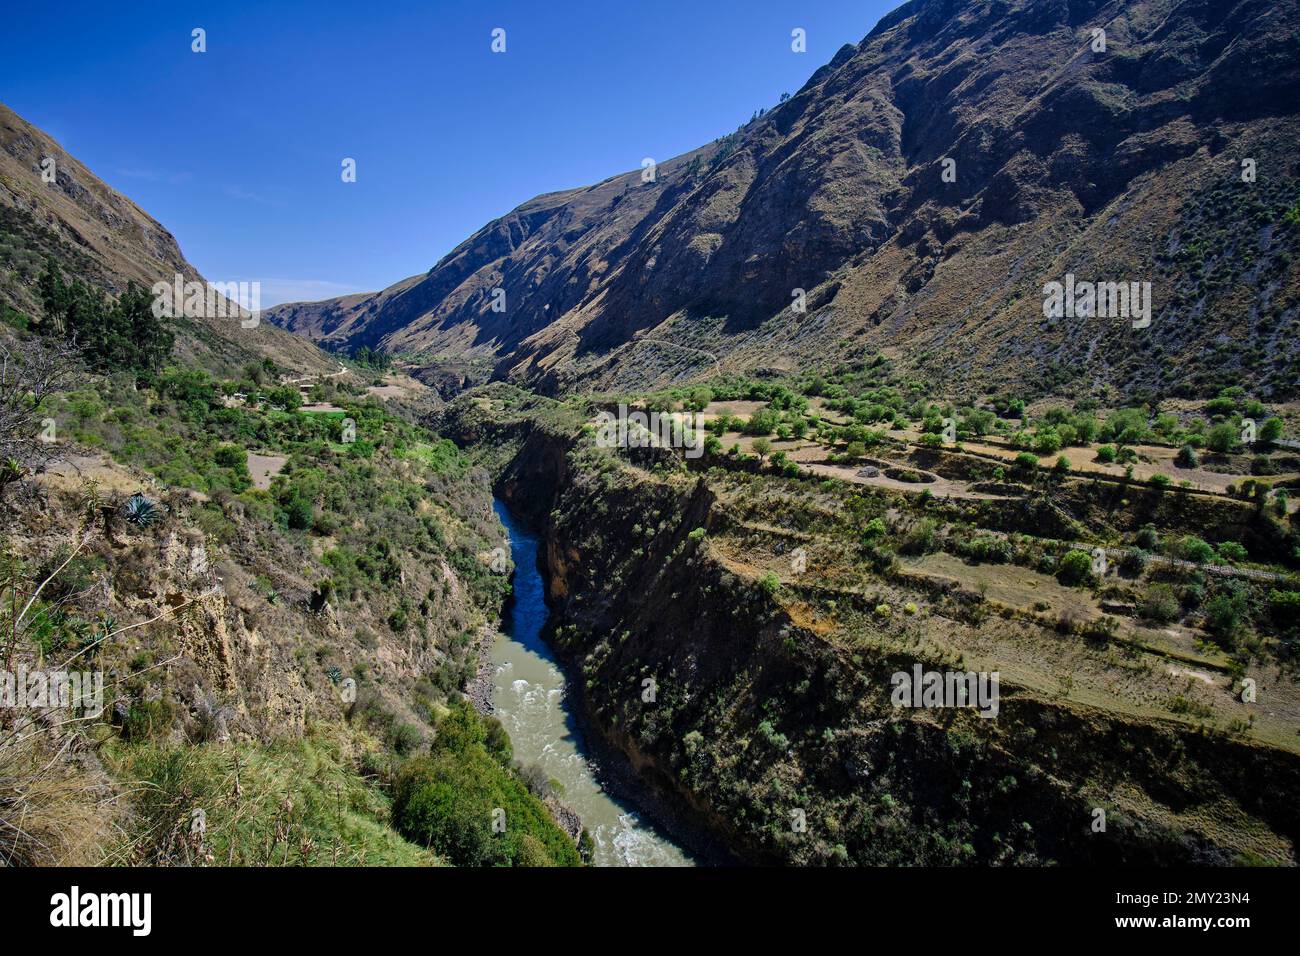 Arid landscape of mountains, mountains, grasslands, and sparse or shrubby vegetation. Scenario that can be observed to the south of the Mantaro river Stock Photo